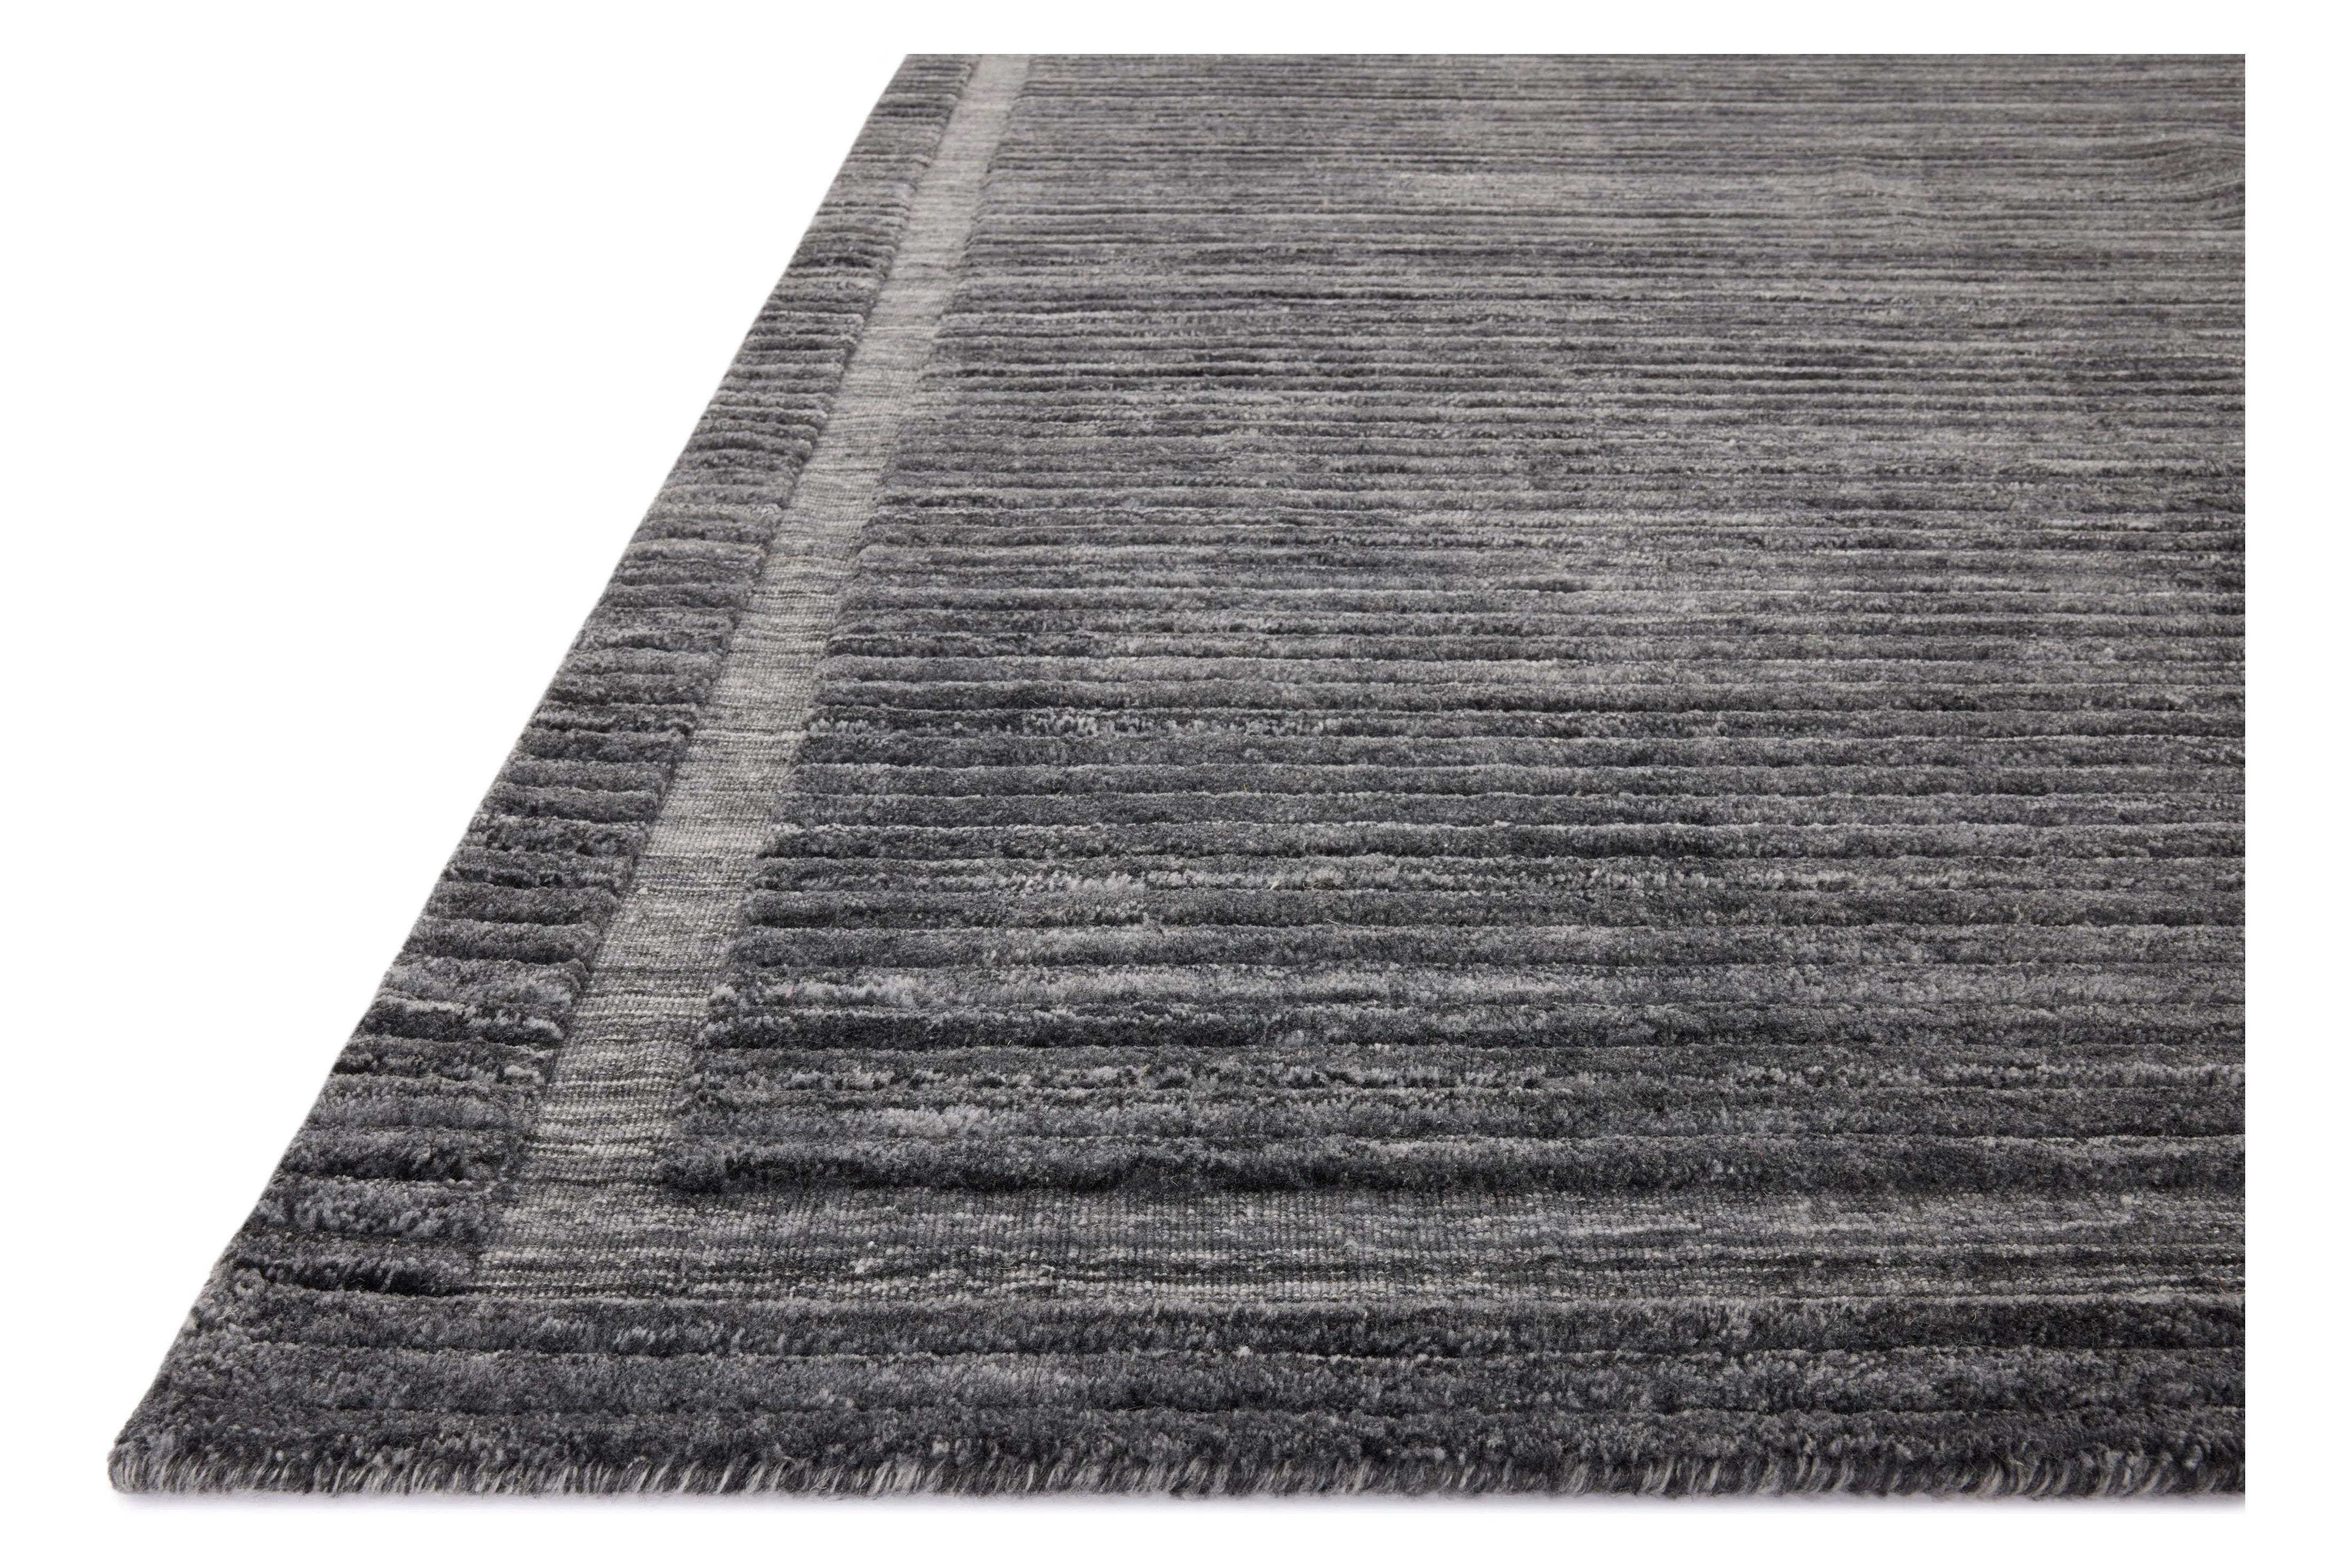 Irresistible to walk upon, the Dana Ink Rug by Brigette Romanek x Loloi has a high-low texture that alternates between a subtly shaggy pile and a soft base. Horizontal broken stripes give the area rug a fresh and energized structure, while a finish of fringe along the edges accentuates its sense of movement. Amethyst Home provides interior design, new home construction design consulting, vintage area rugs, and lighting in the Winter Garden metro area.